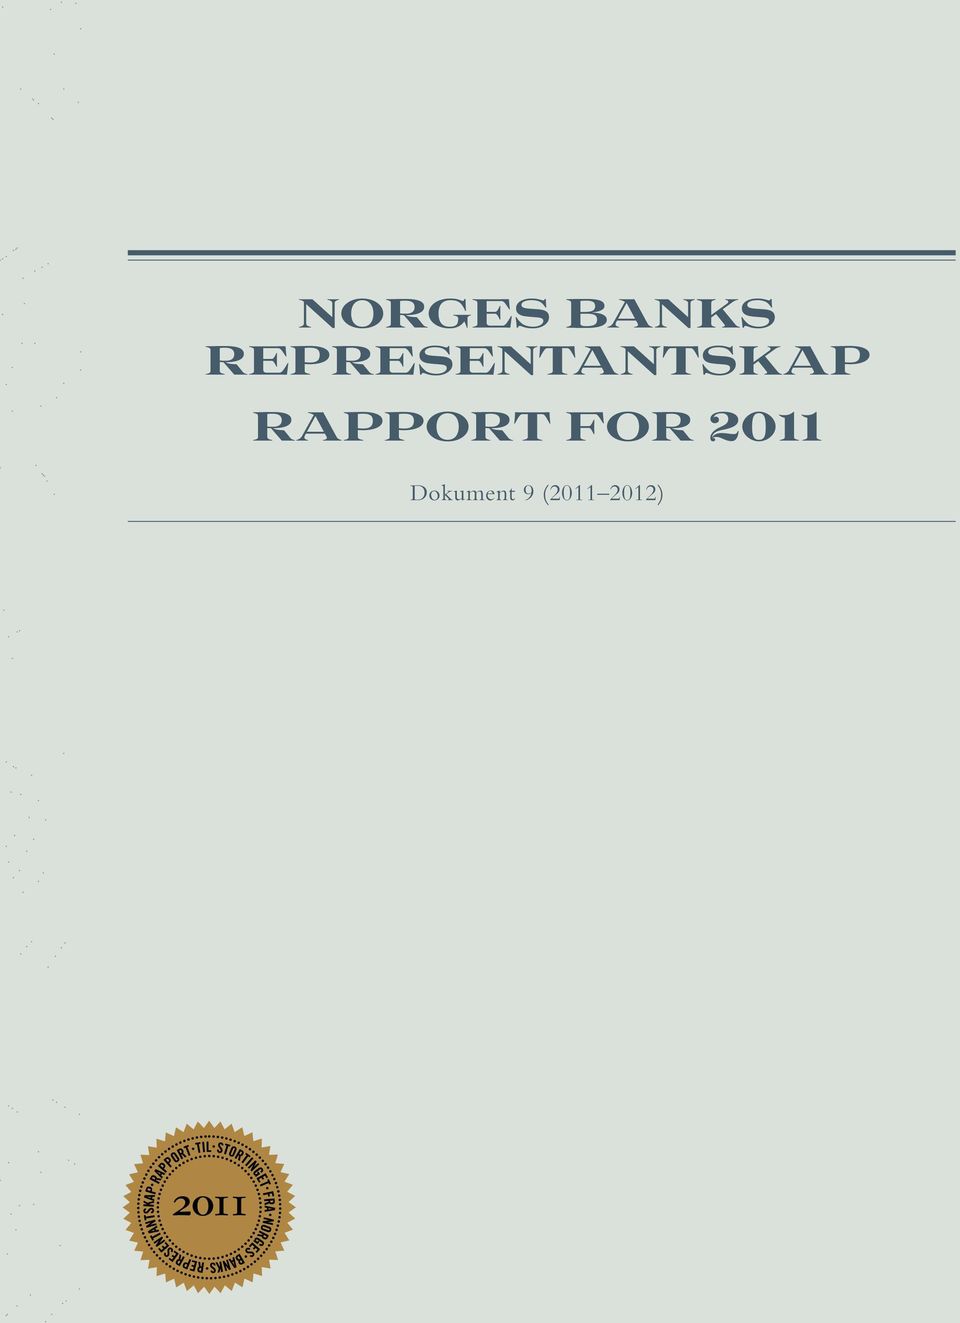 RAPPORT FOR 2011